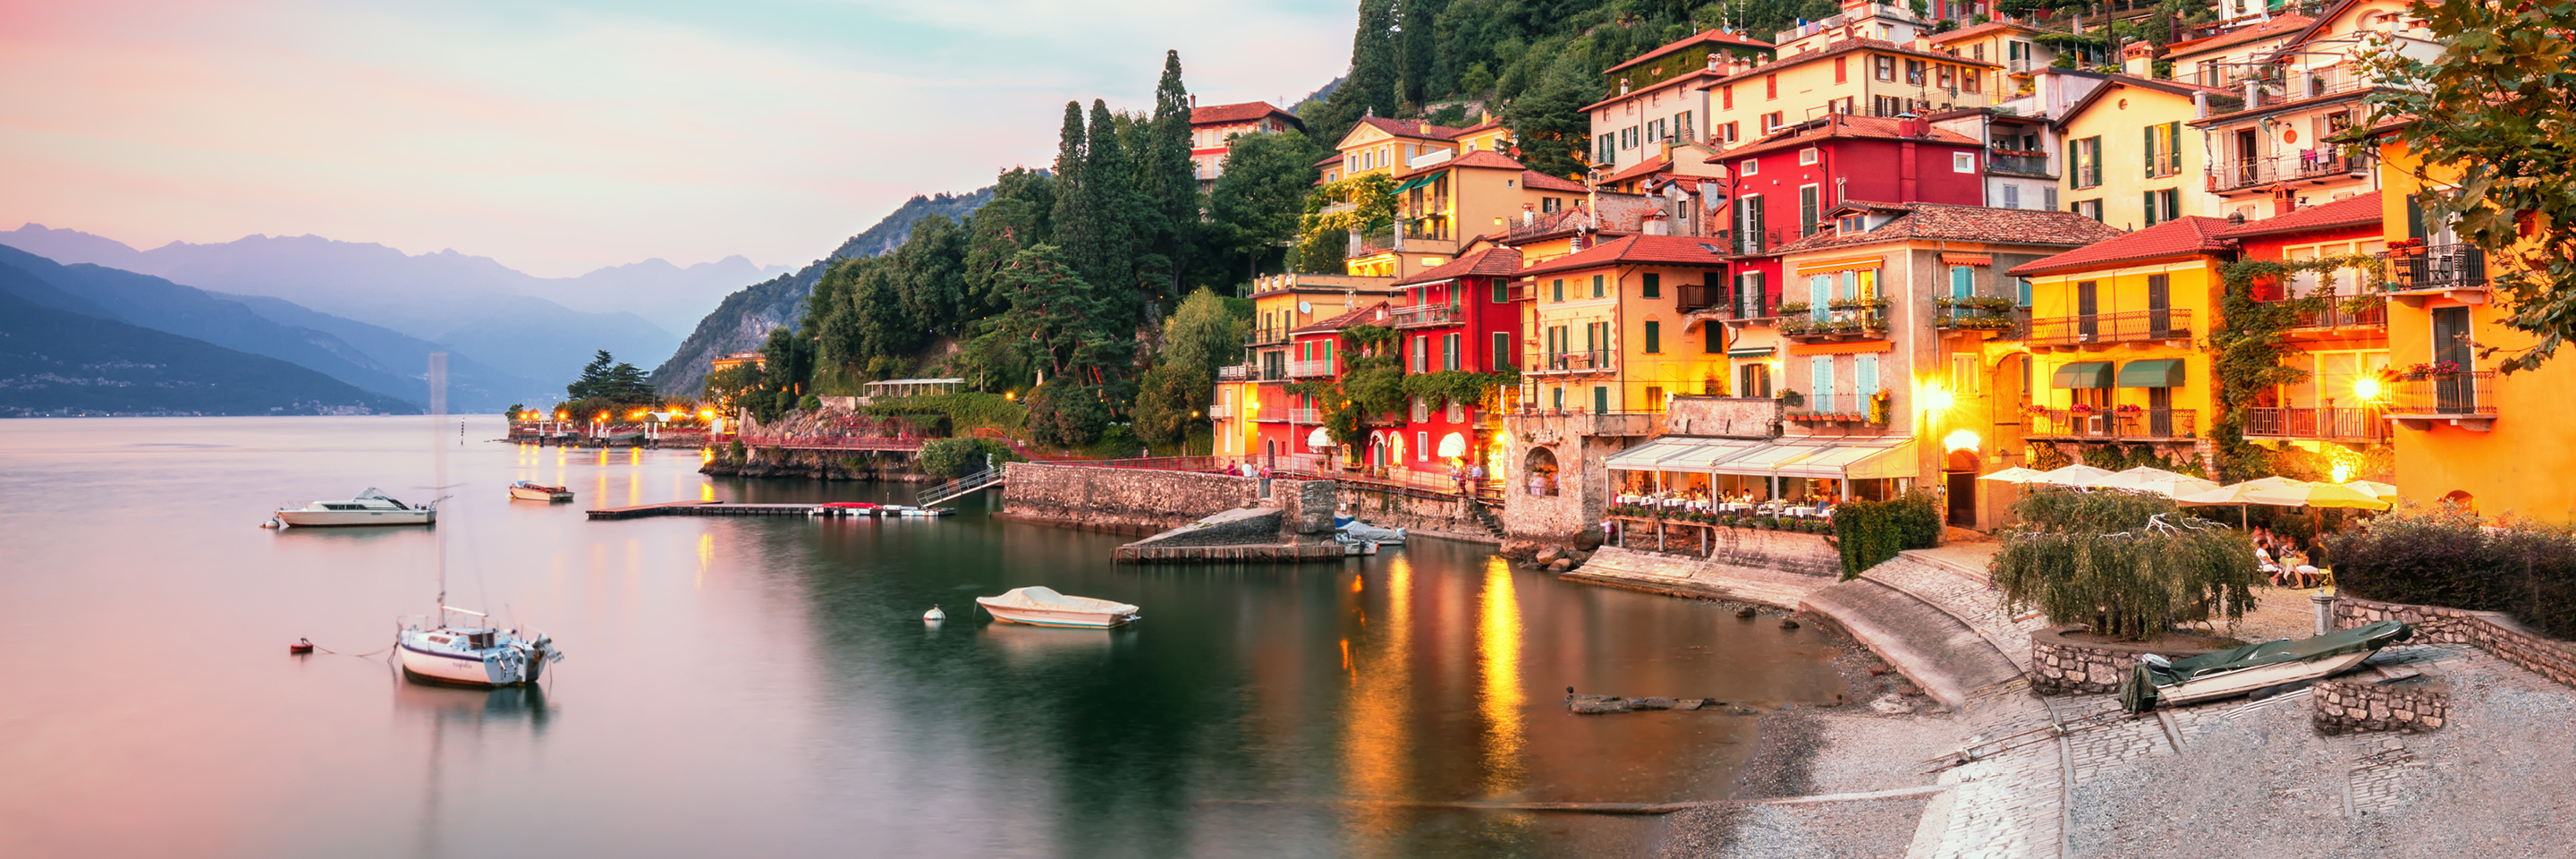 Romantic Rhine with Mount Pilatus, 1 Night in Lucerne & 3 Nights in Lake Como (Southbound)